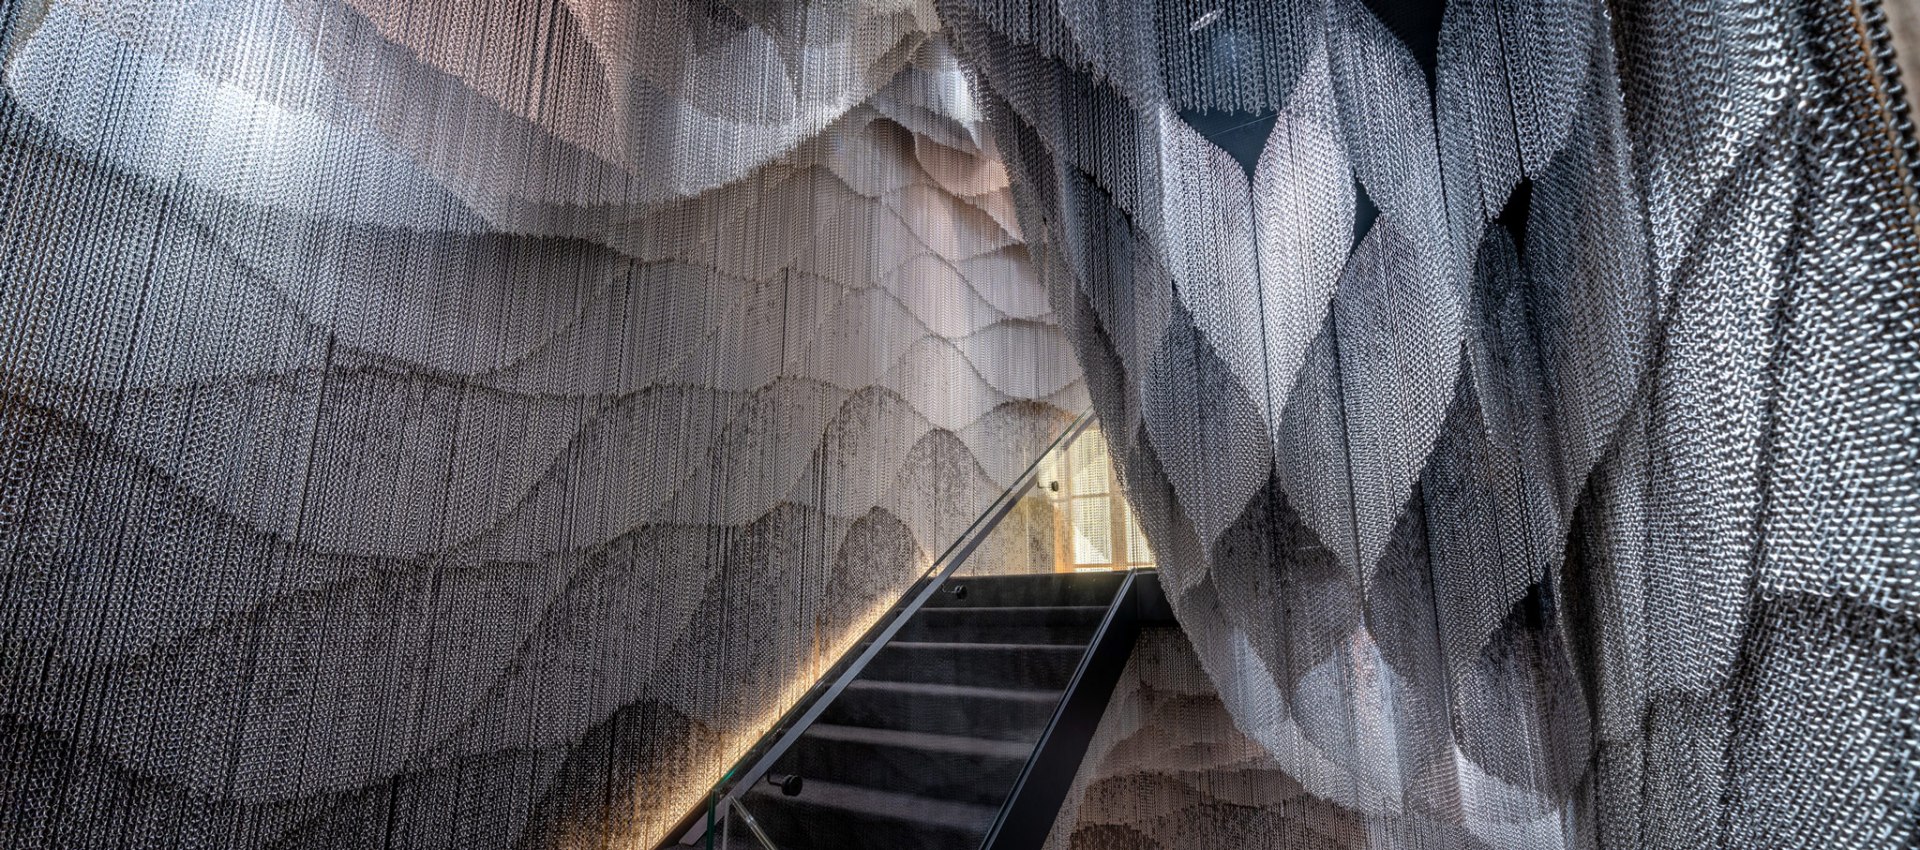 Symbolism of light, shadow color. Intervention on final staircase of Casa Batlló by Kengo Kuma | The Strength of | From 1998